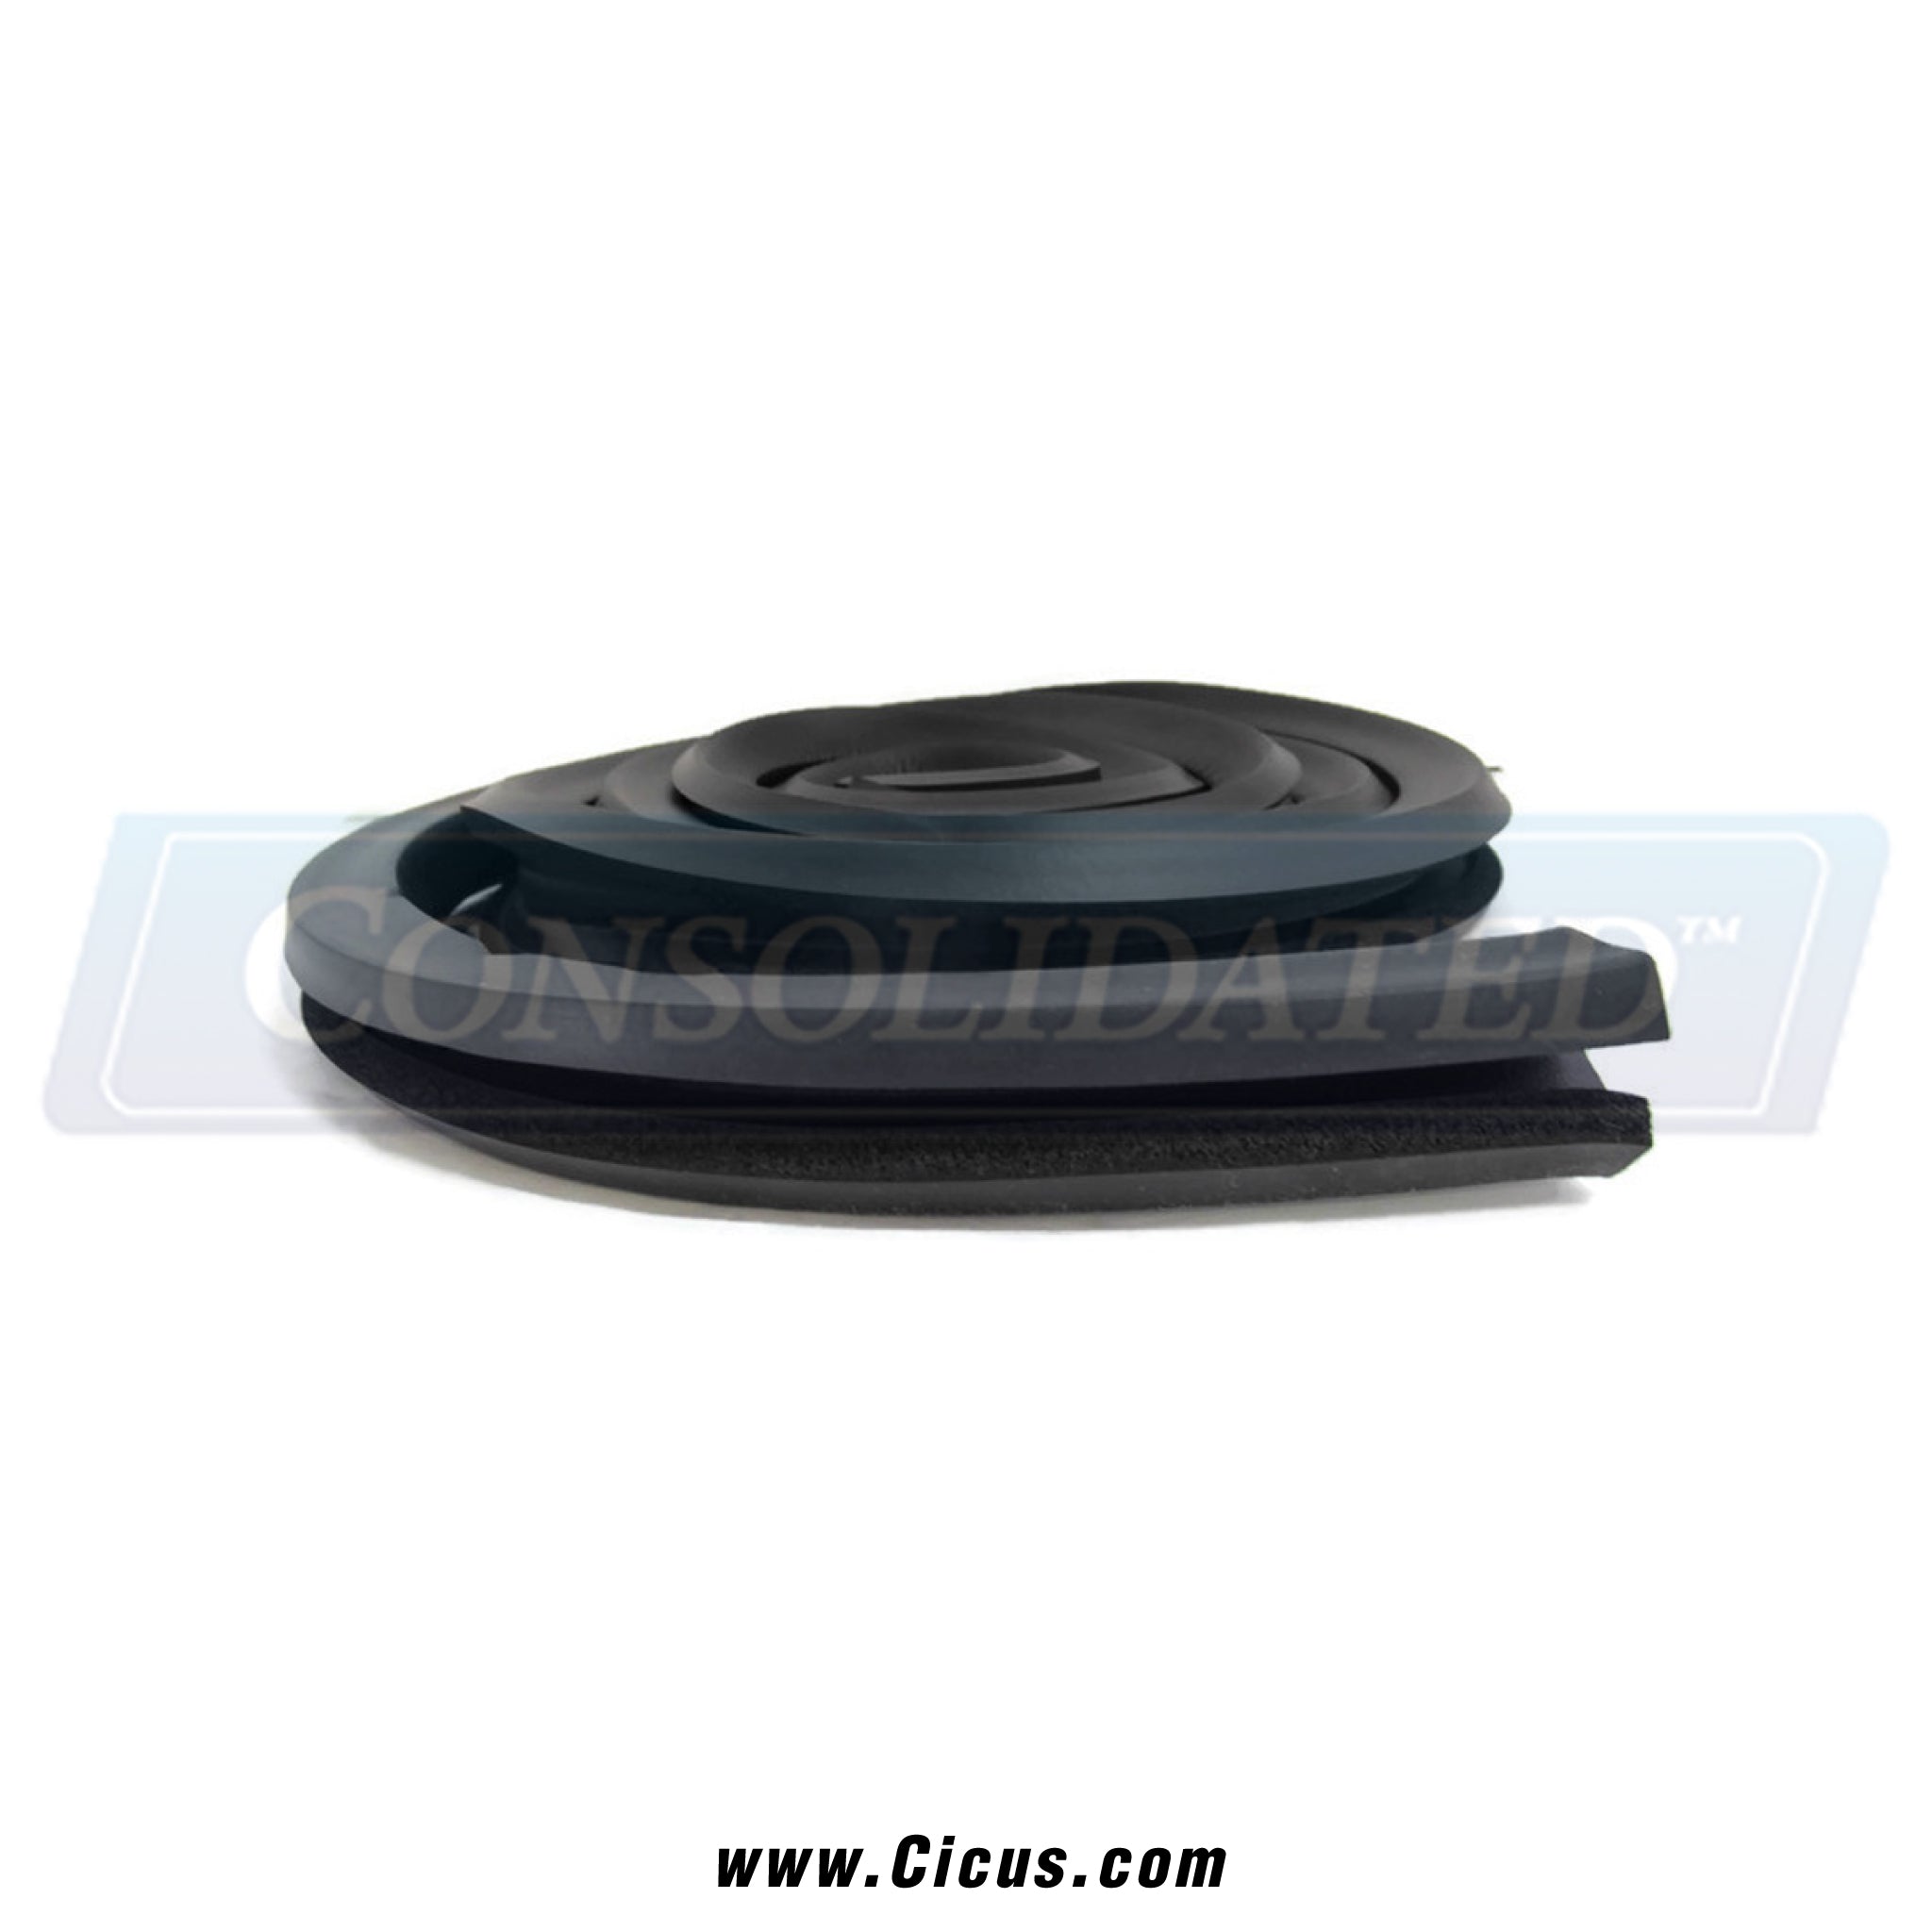 ADC LG Steel DR Extruded Gasket 104" [882411] - Front view